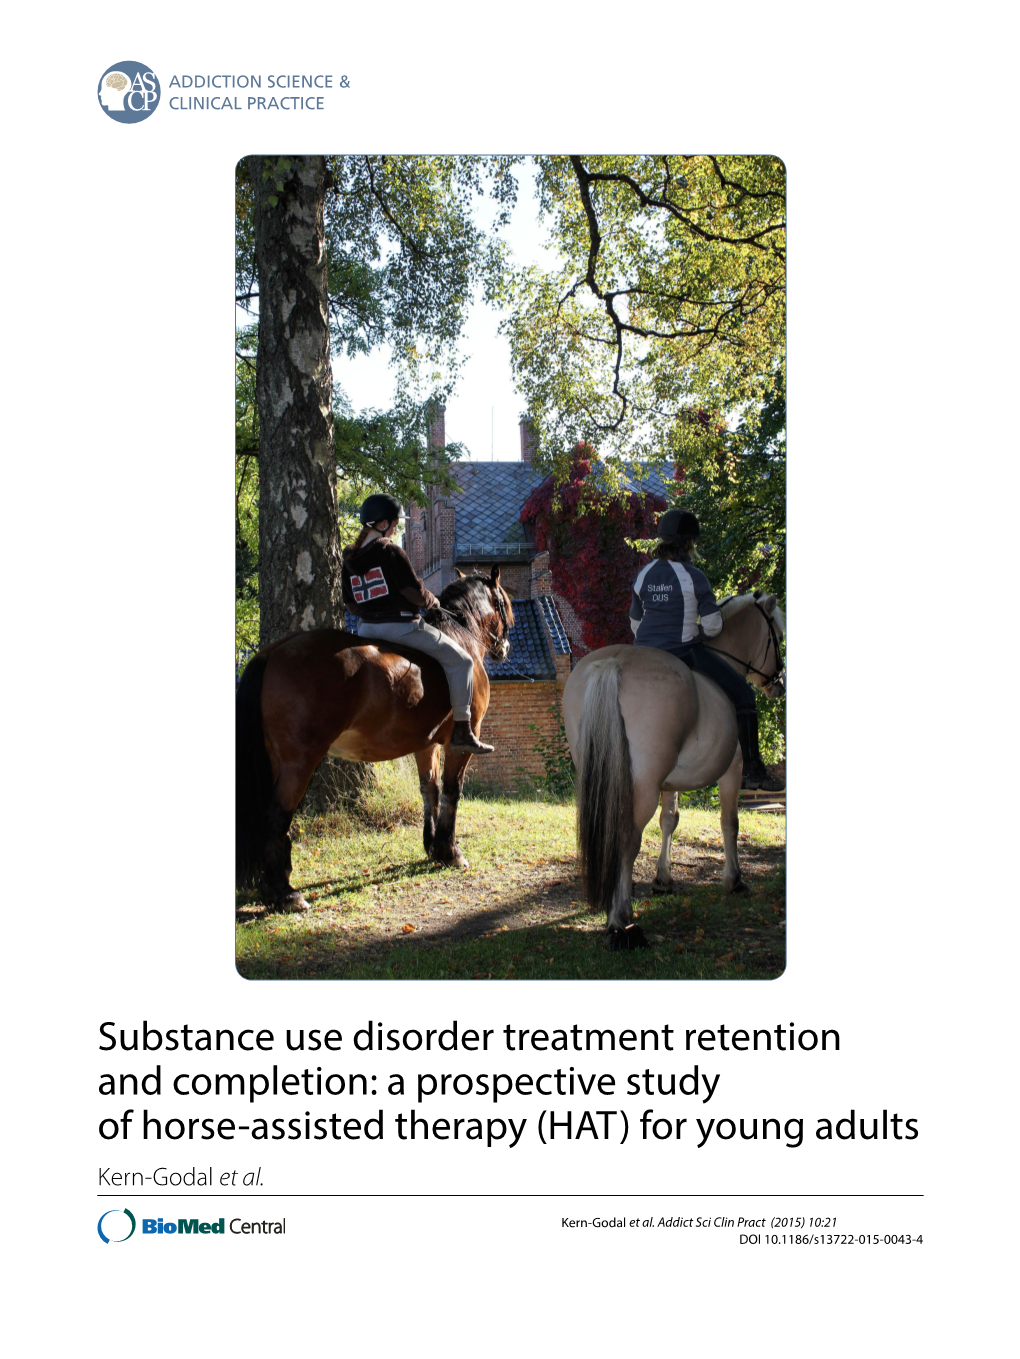 A Prospective Study of Horse-Assisted Therapy (HAT) for Young Adults